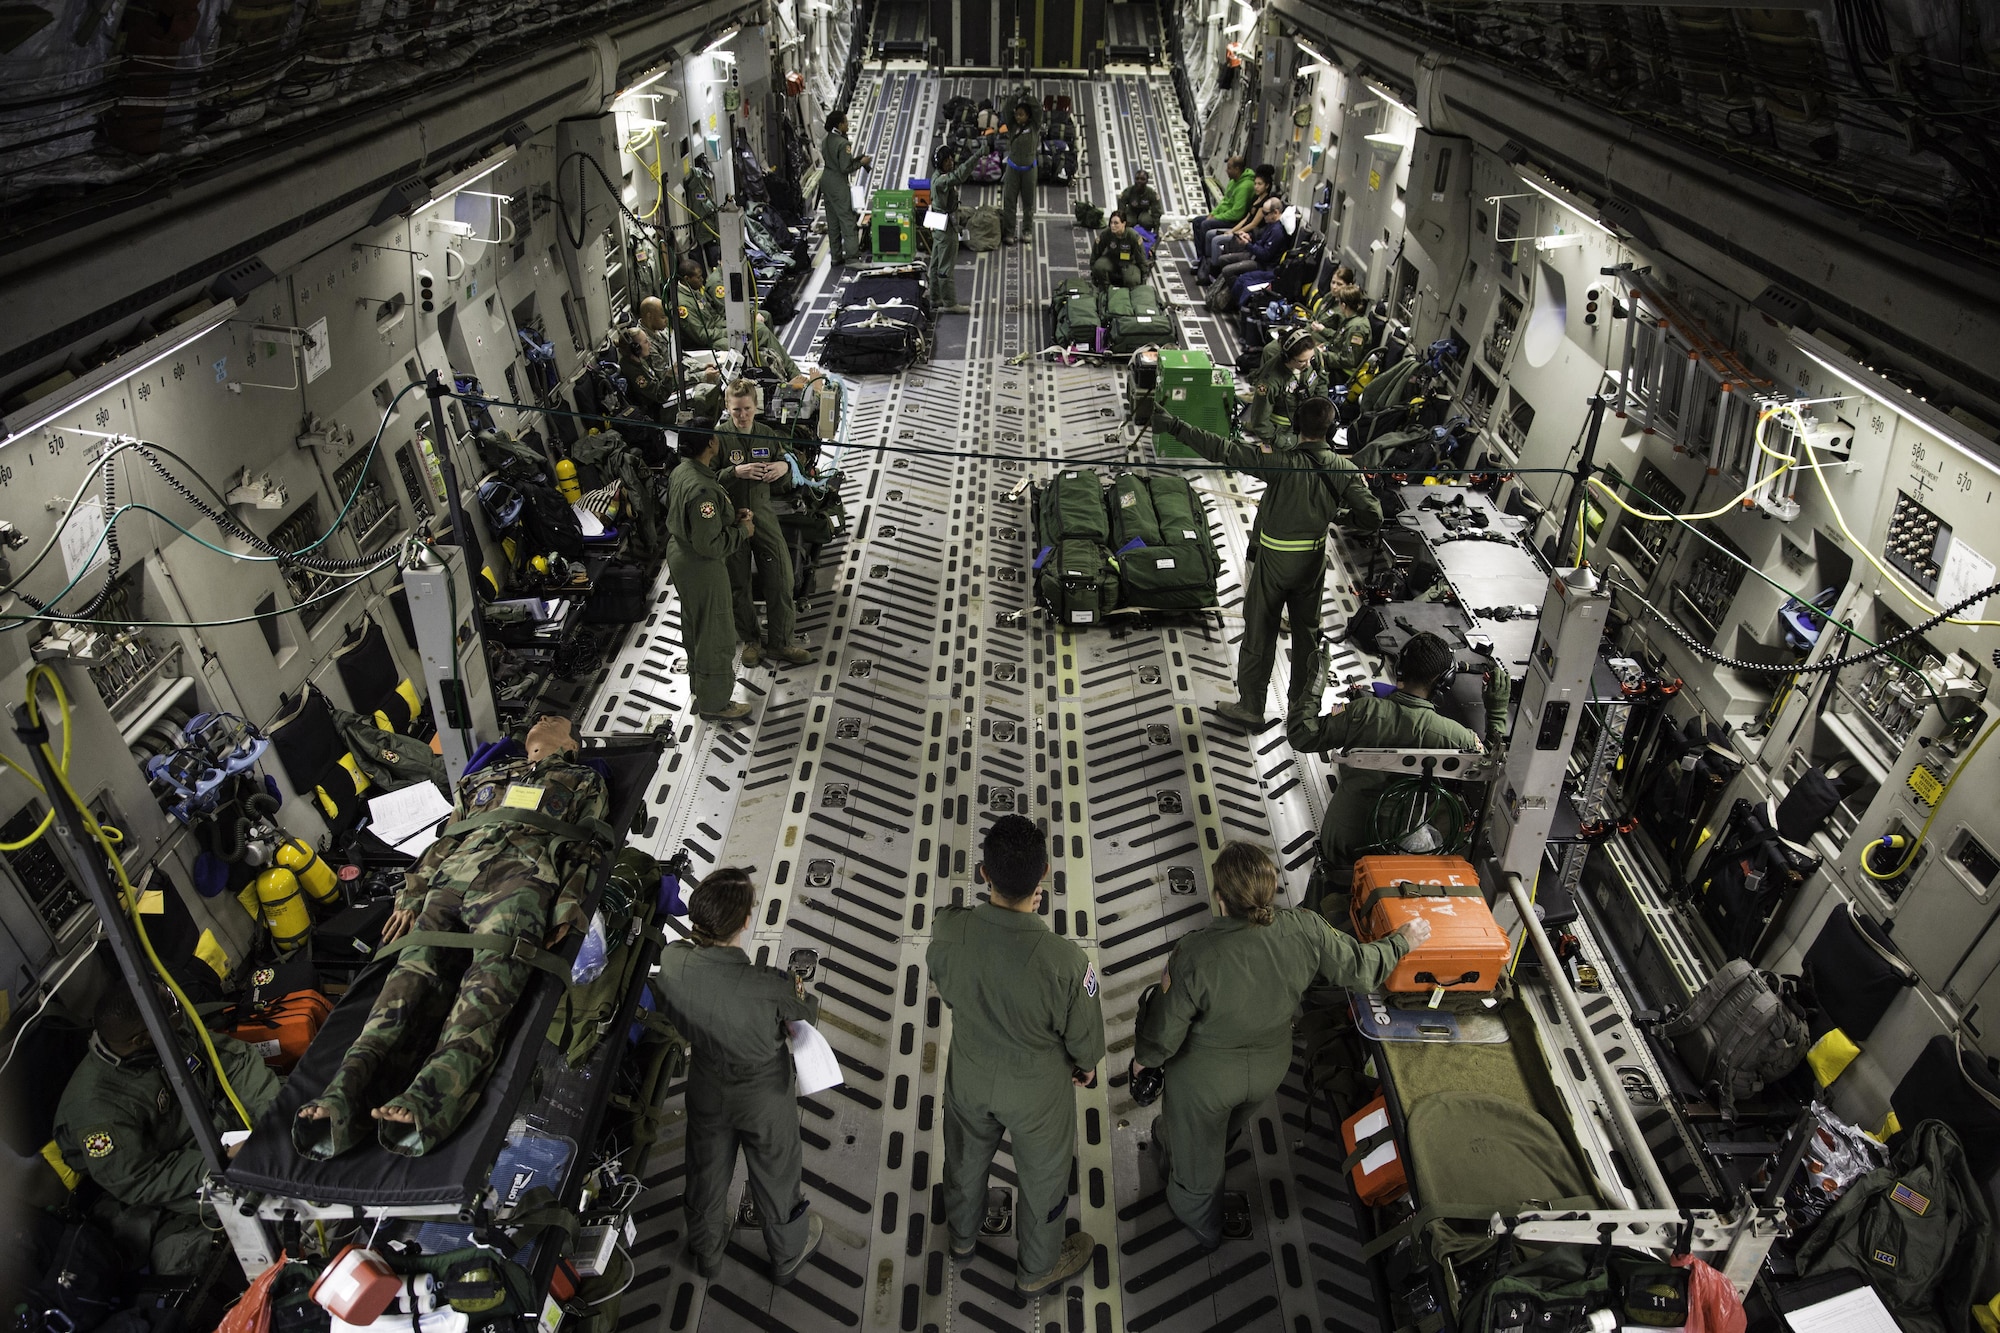 Reservists assigned to the 459th Air Refueling Wing at Joint Base Andrews, Md. conduct aeromedical training in a C-17 Globemaster III Feb. 22, 2015 during a training mission in San Juan, Puerto Rico. The mission was part of a three day fly-away with Airmen from the 315th Airlift Wing at Joint Base Charleston, South Carolina and aeromedical Airmen from the 459th Air Refueling Wing at Joint Base Andrews, Maryland. The training mission was a cost-effective means to accomplish currency items and evaluations for flight crew members and provided C-17 familiarization and proficiency training for aeromedical Airmen. (U.S. Air Force Photo/Tech. Sgt. Shane Ellis)
